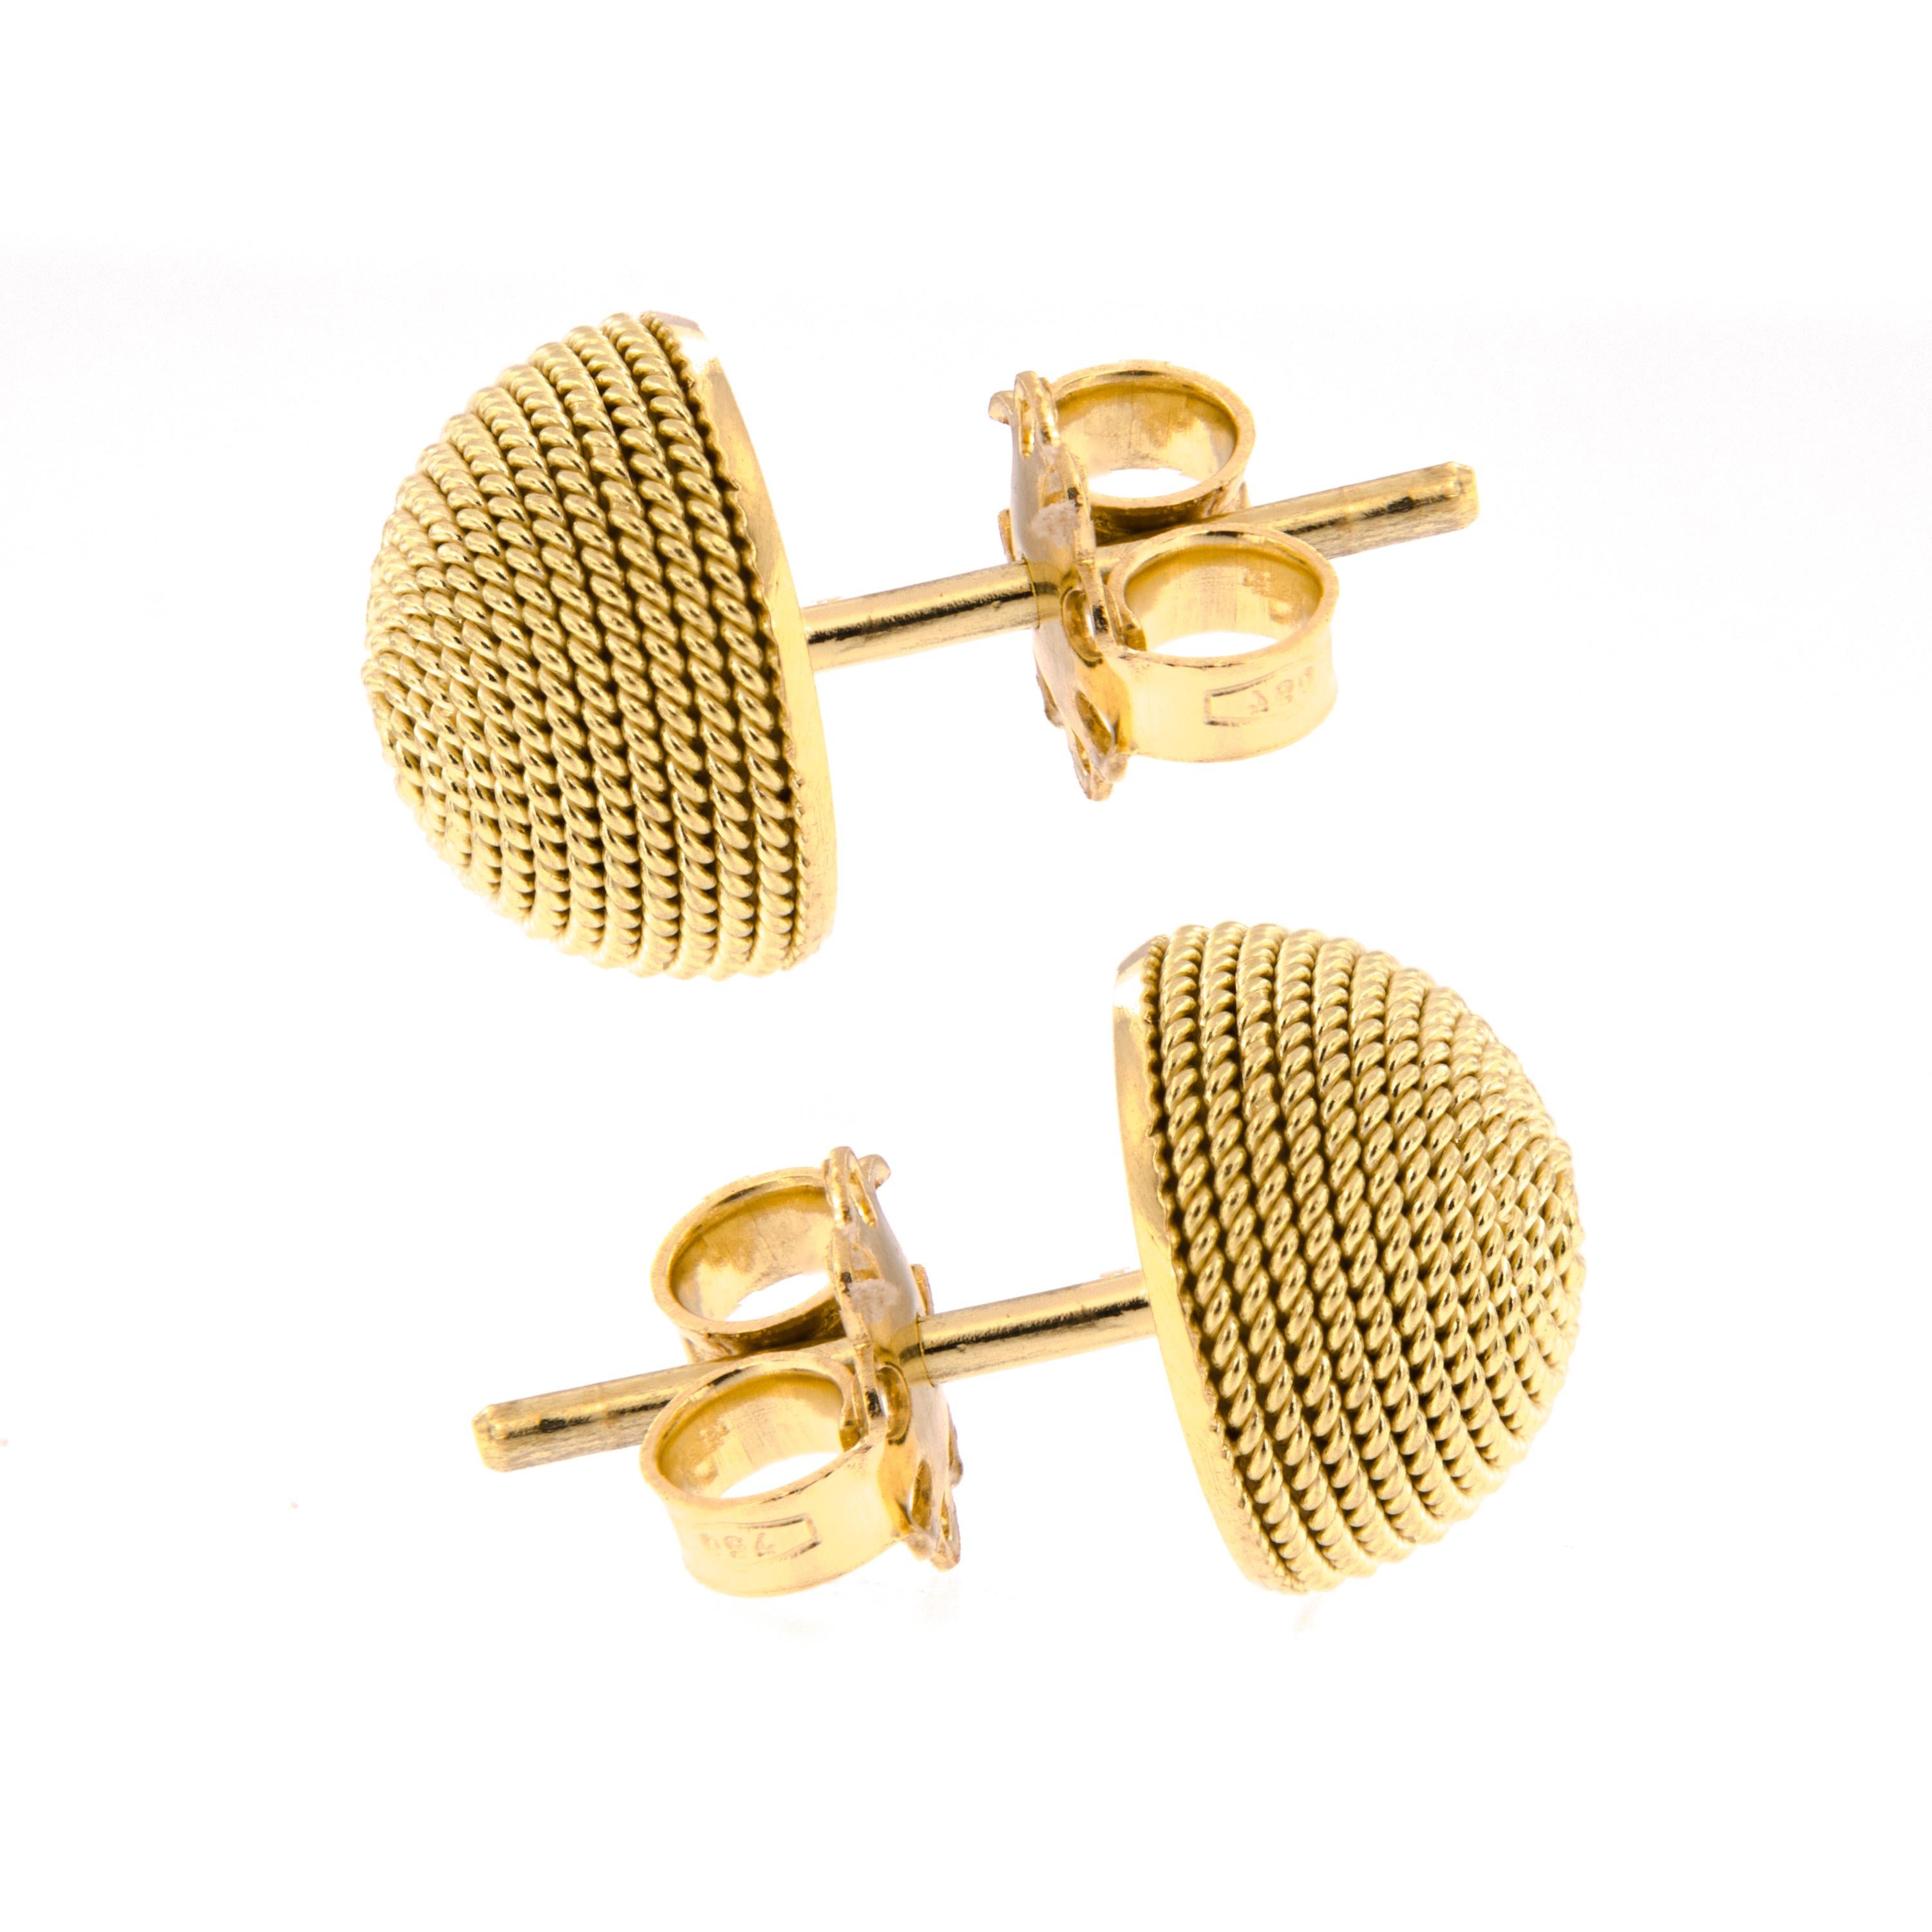 Classic post earrings with a nautical flair. Earrings are beautifully crafted in 18k yellow gold. Weigh 4.2 grams. 10mm in diameter.